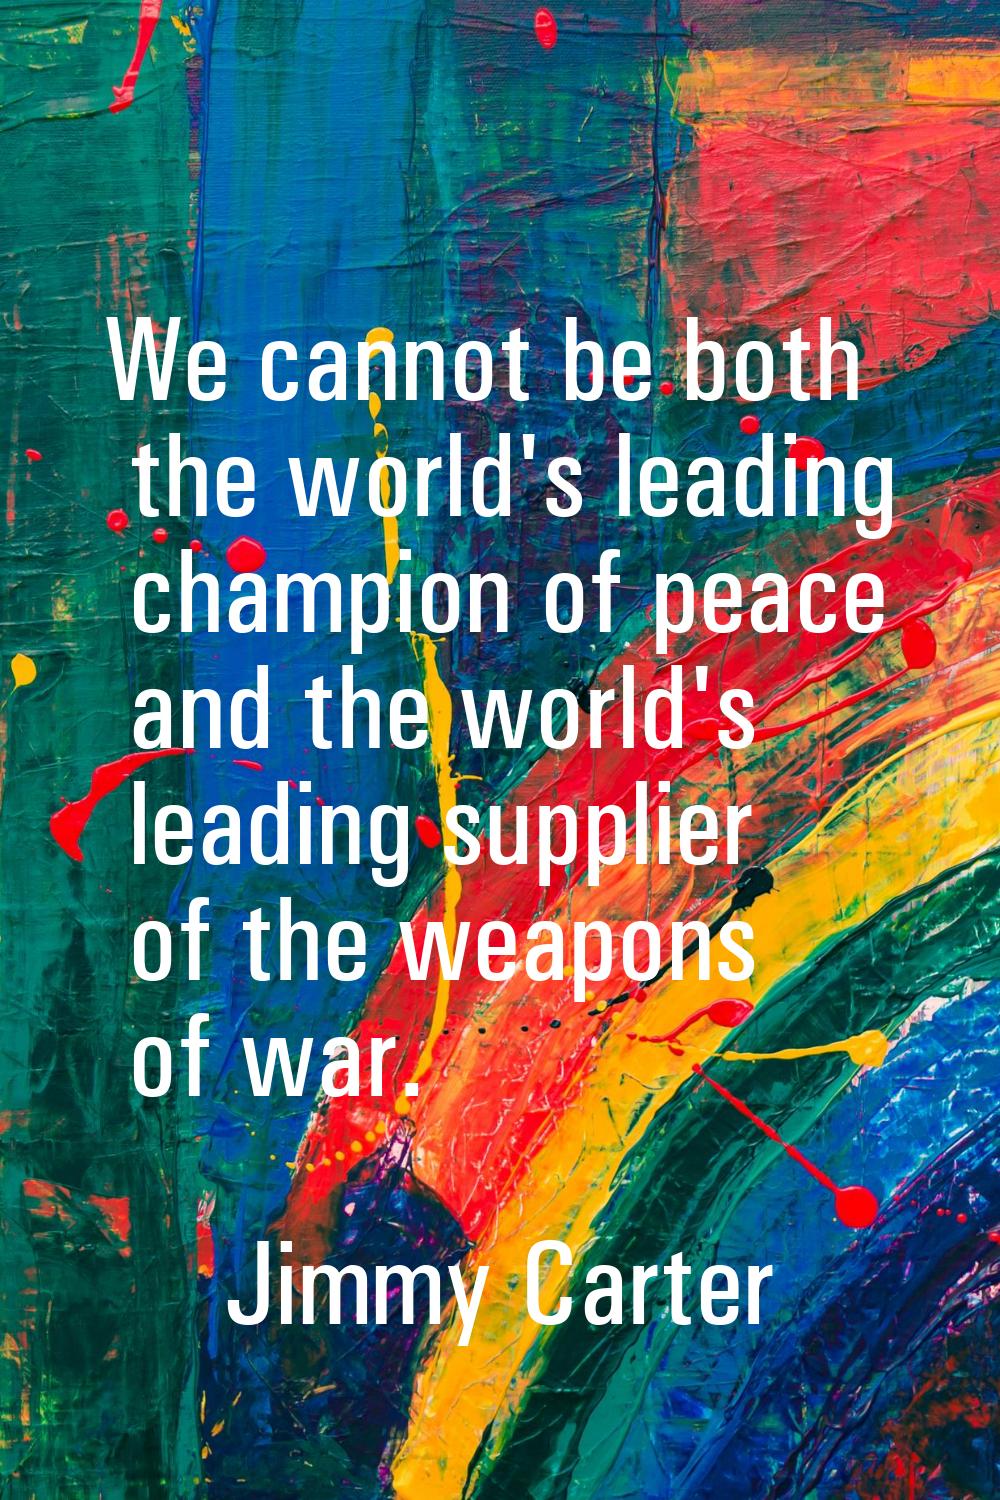 We cannot be both the world's leading champion of peace and the world's leading supplier of the wea